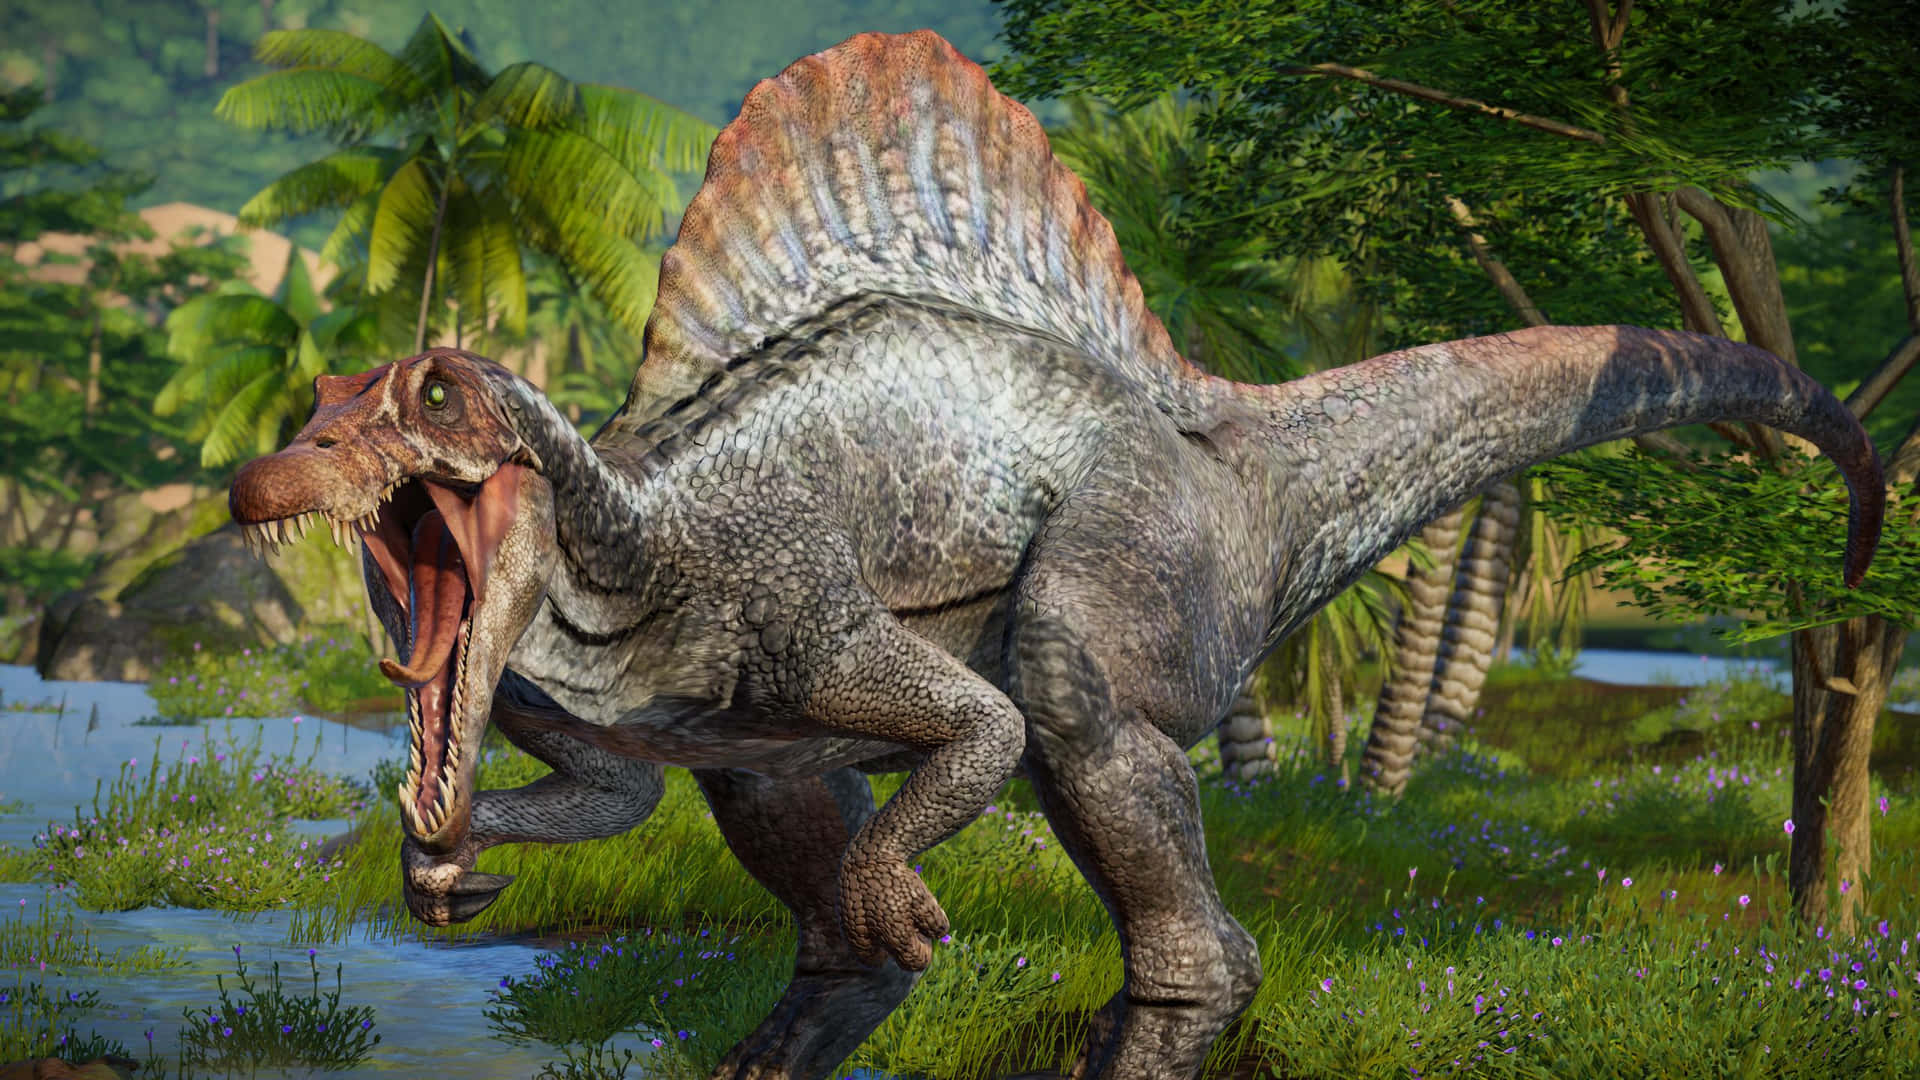 Have you seen Spinosaurus, the dinosaur with an appearance of a giant crocodile? Wallpaper